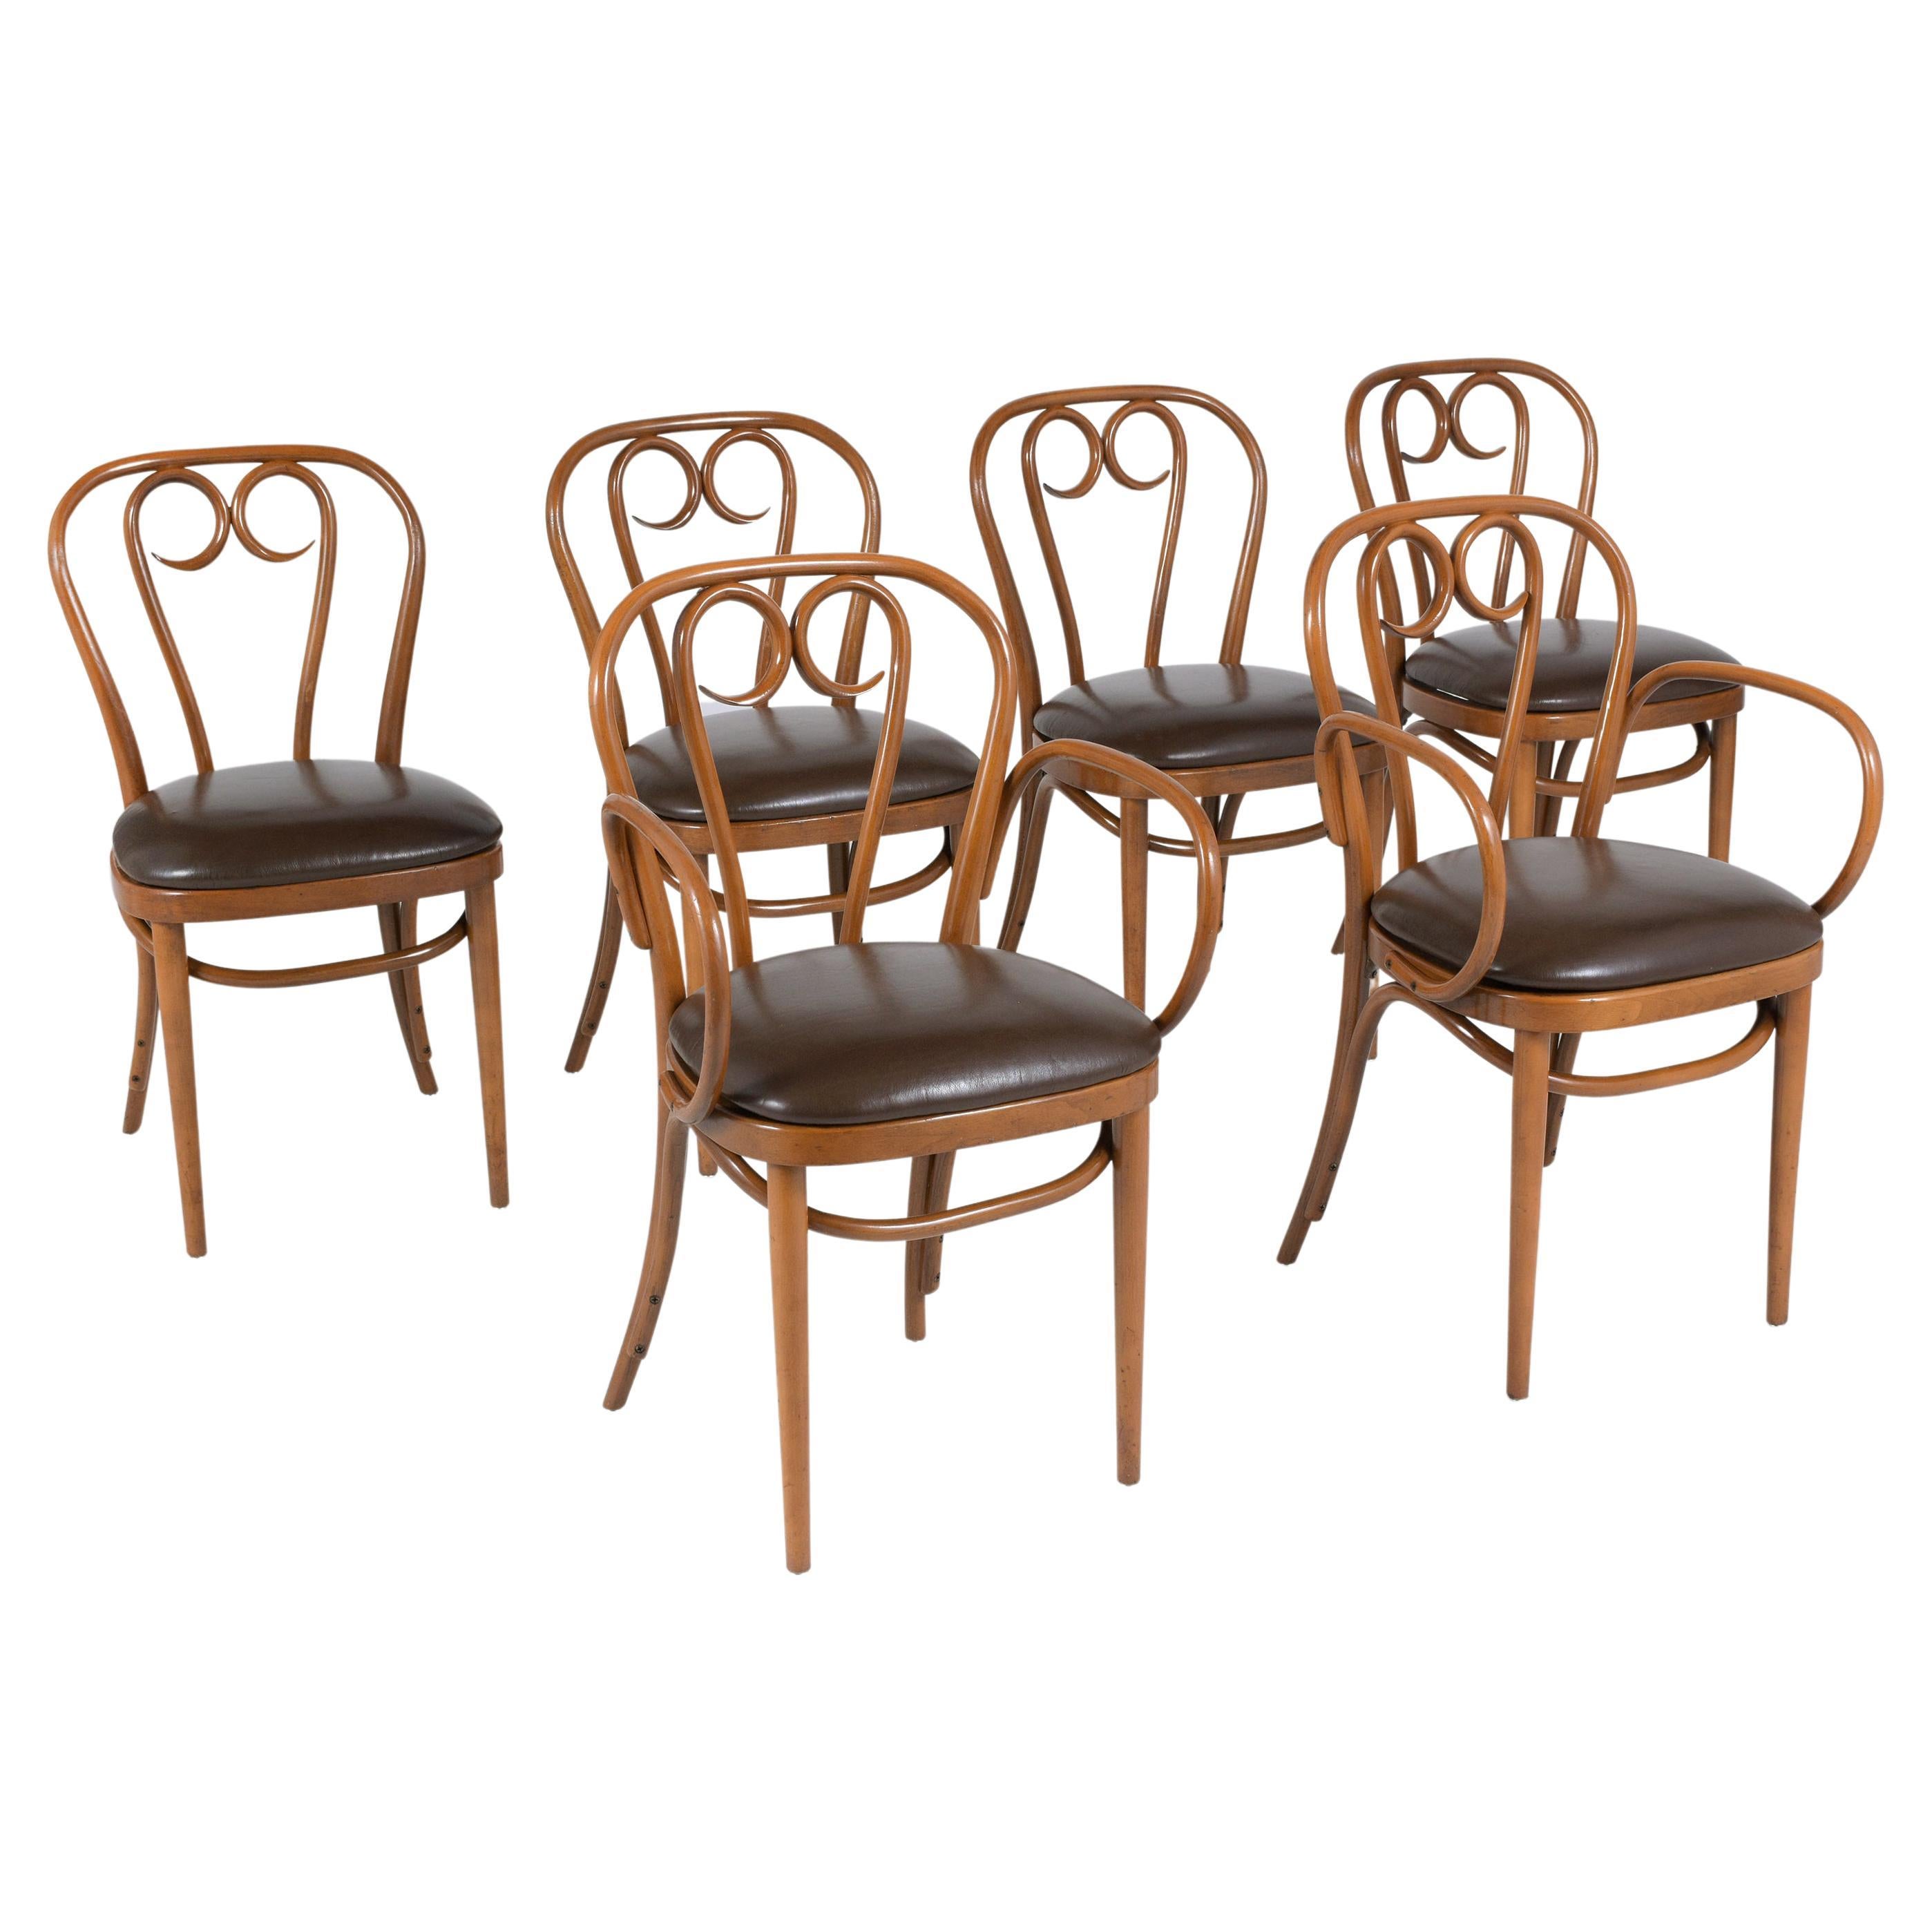 Art-Deco Thonet Bentwood Leather Dining Chairs with Walnut Finish - Set of Six For Sale